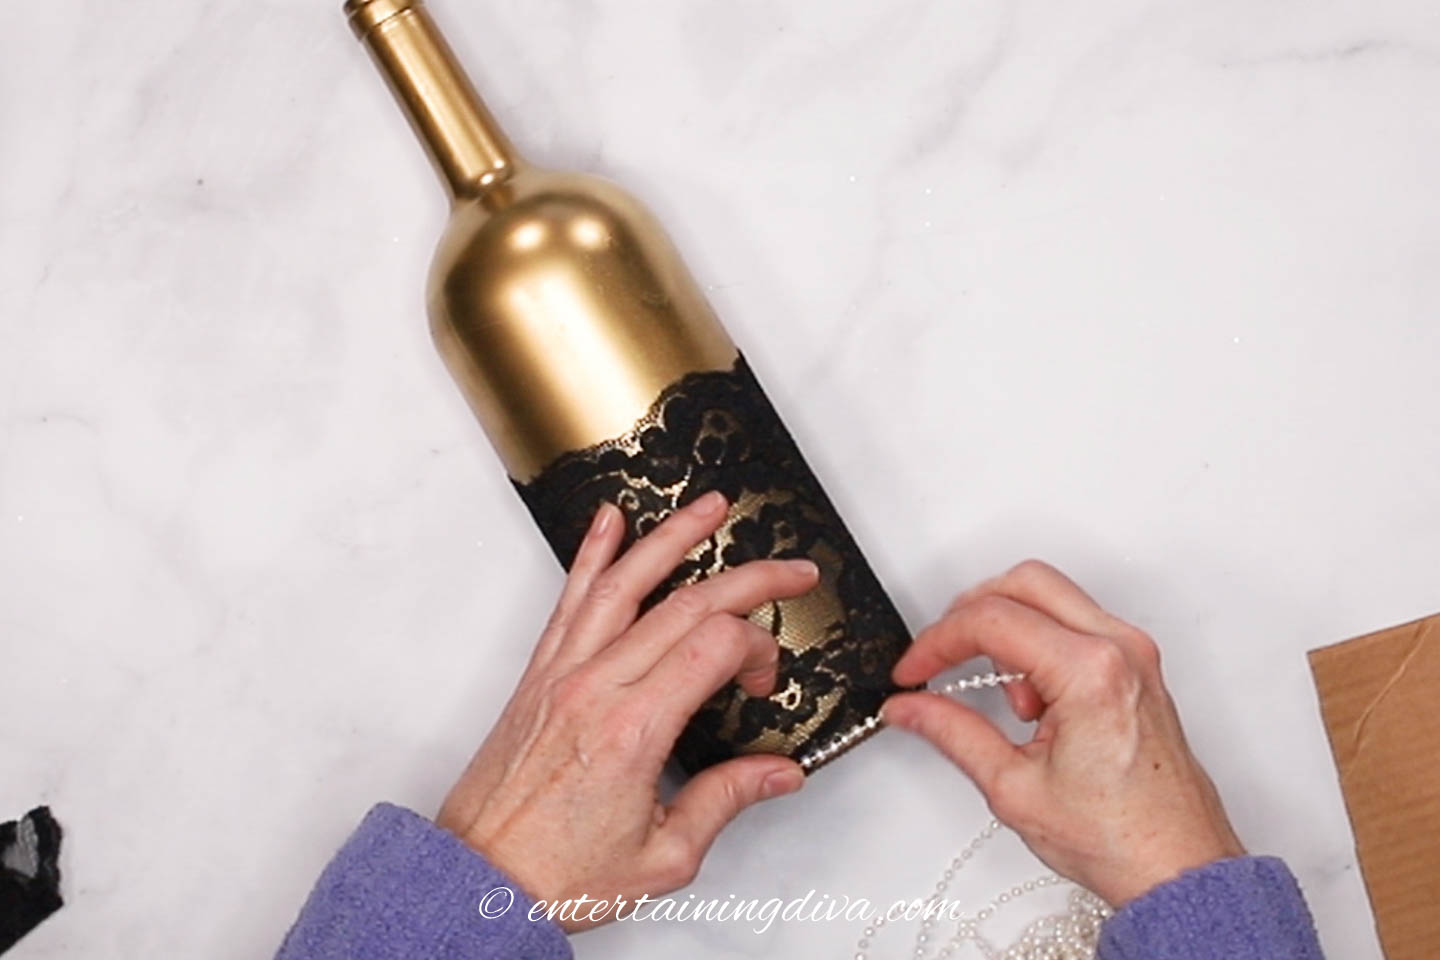 A string of faux pearls being attached to the bottom of the wine bottle